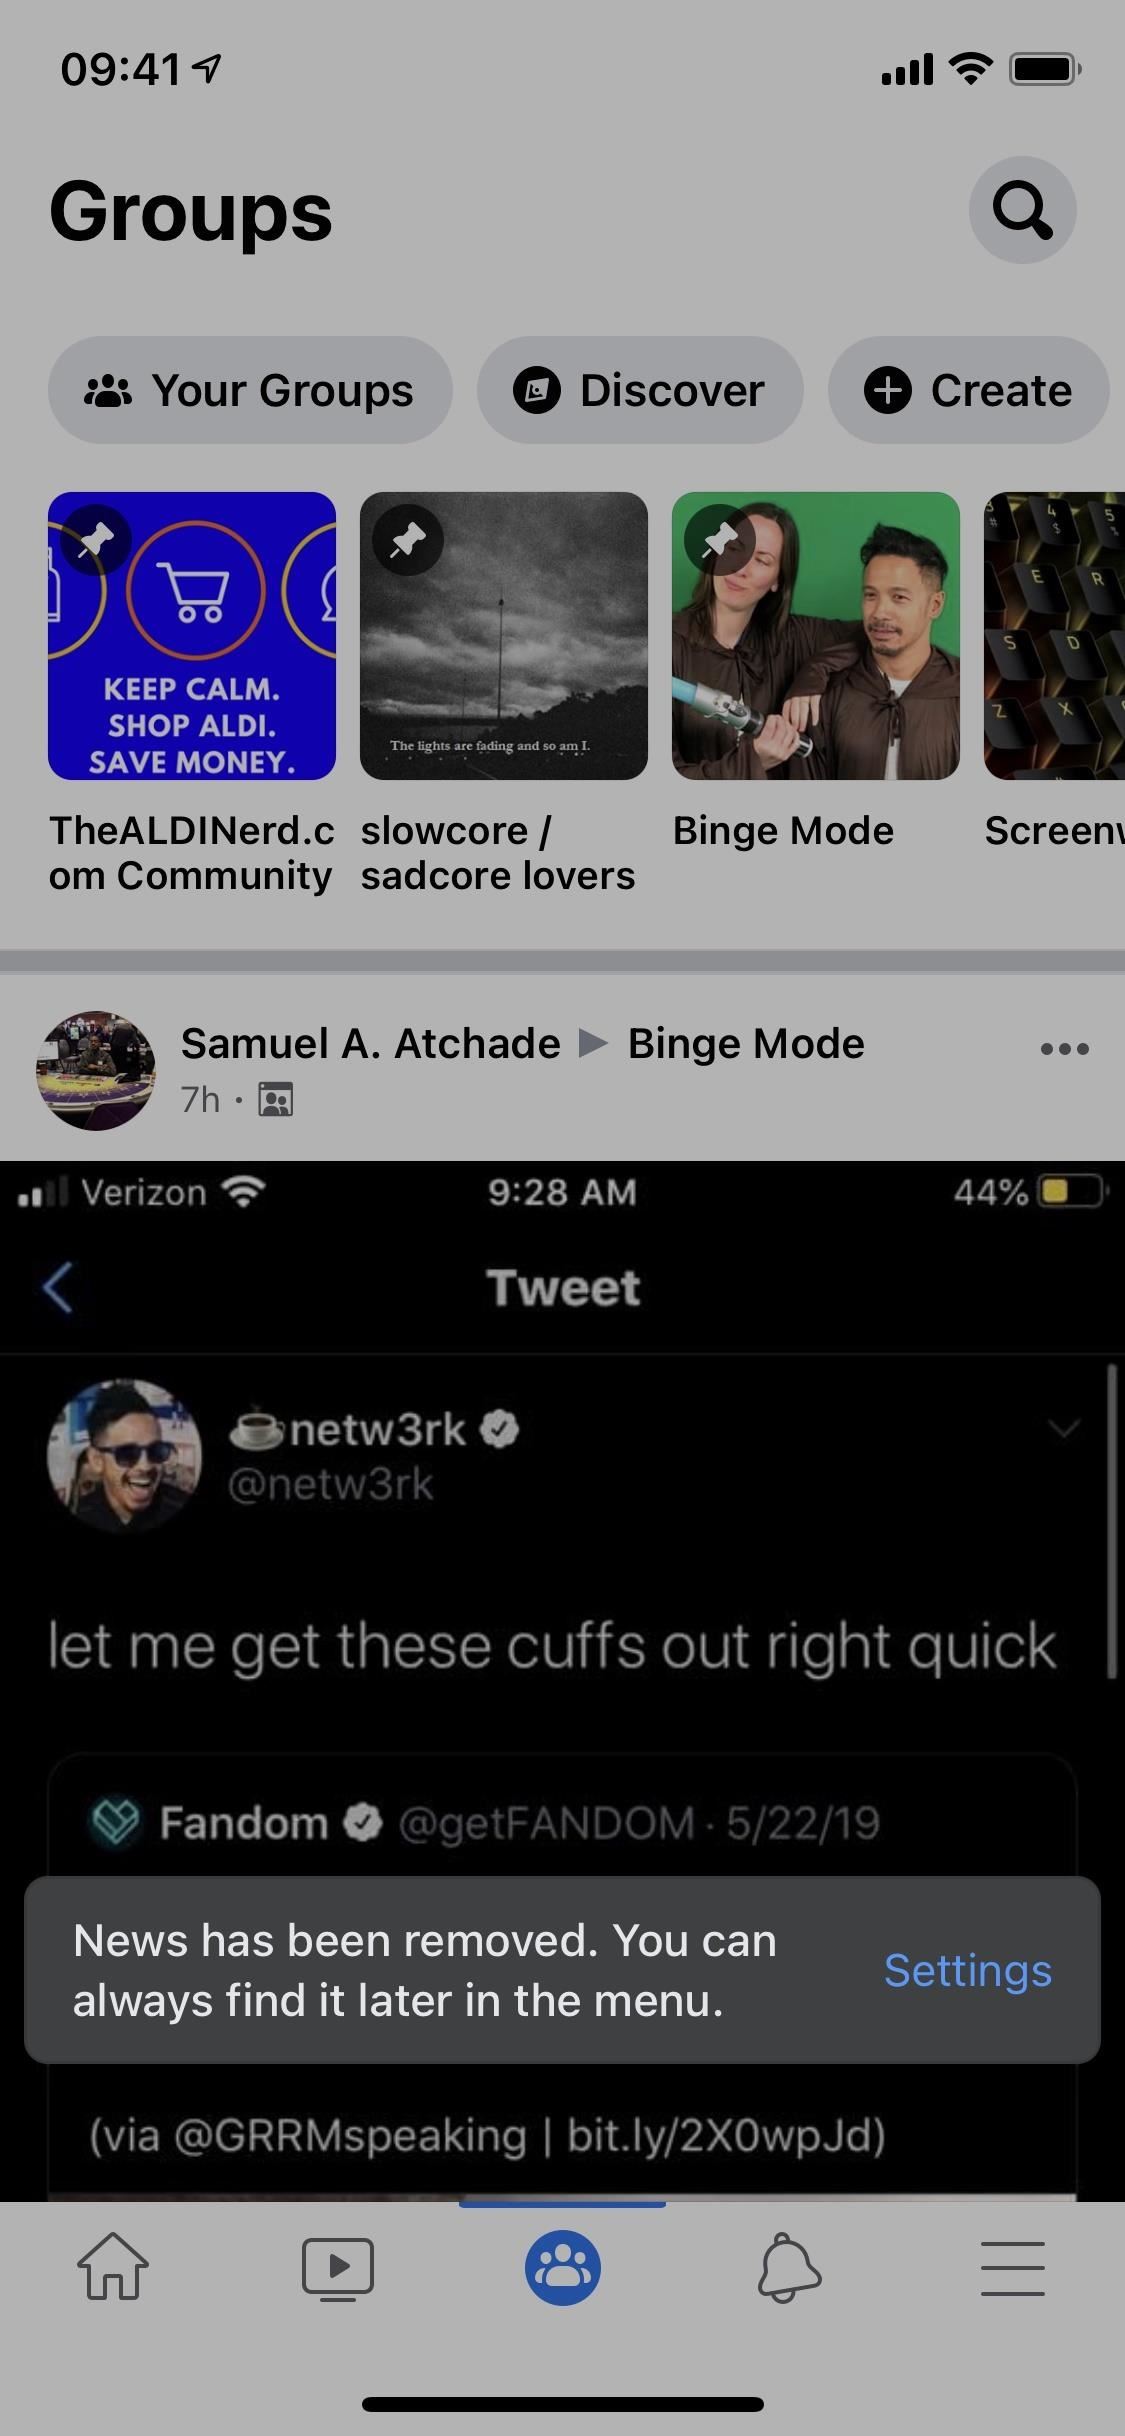 Clean Up Facebook's Shortcuts Bar to Get Rid of Tabs & Notification Dots You Don't Need